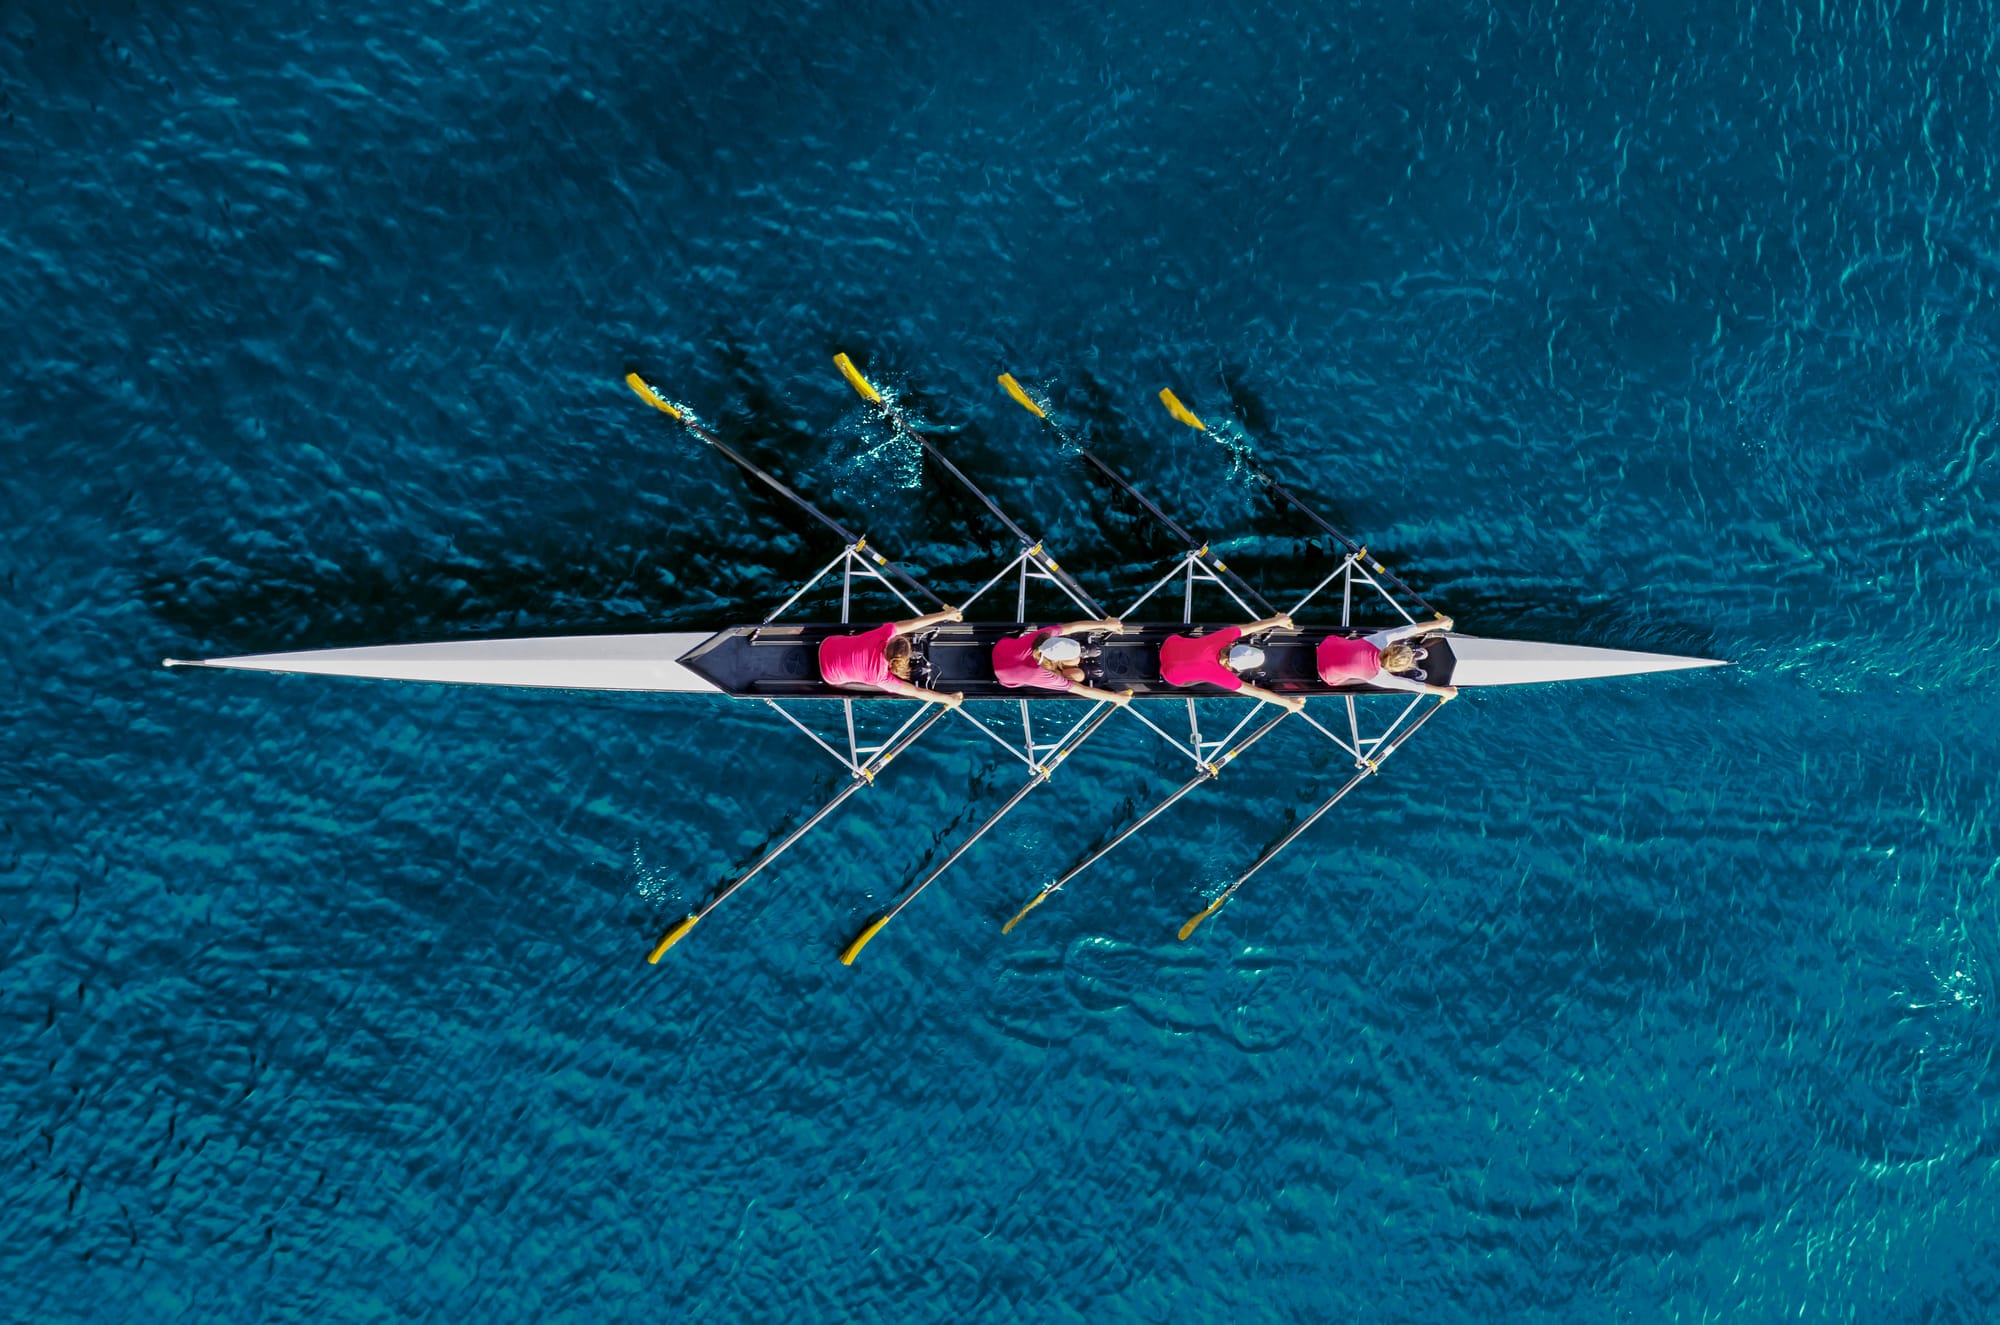  Aerial view of four people propelling a rowboat through water.